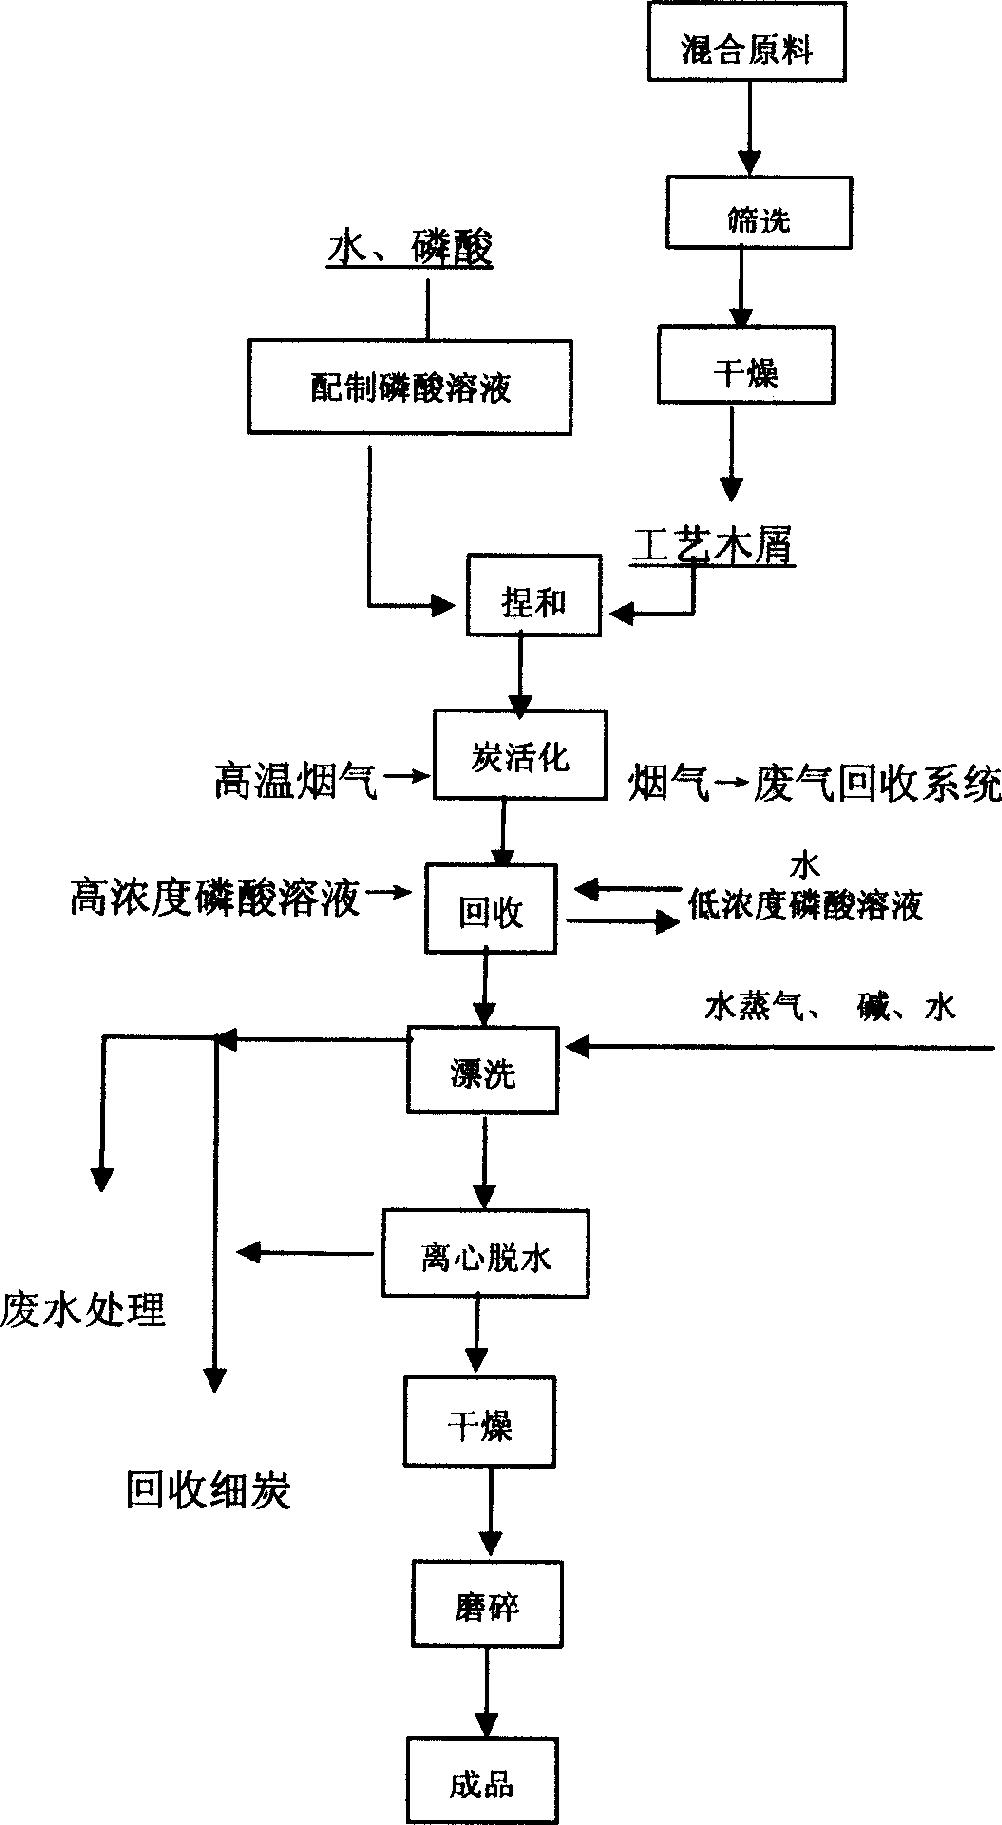 Active carbon producing process with mixed stalk material